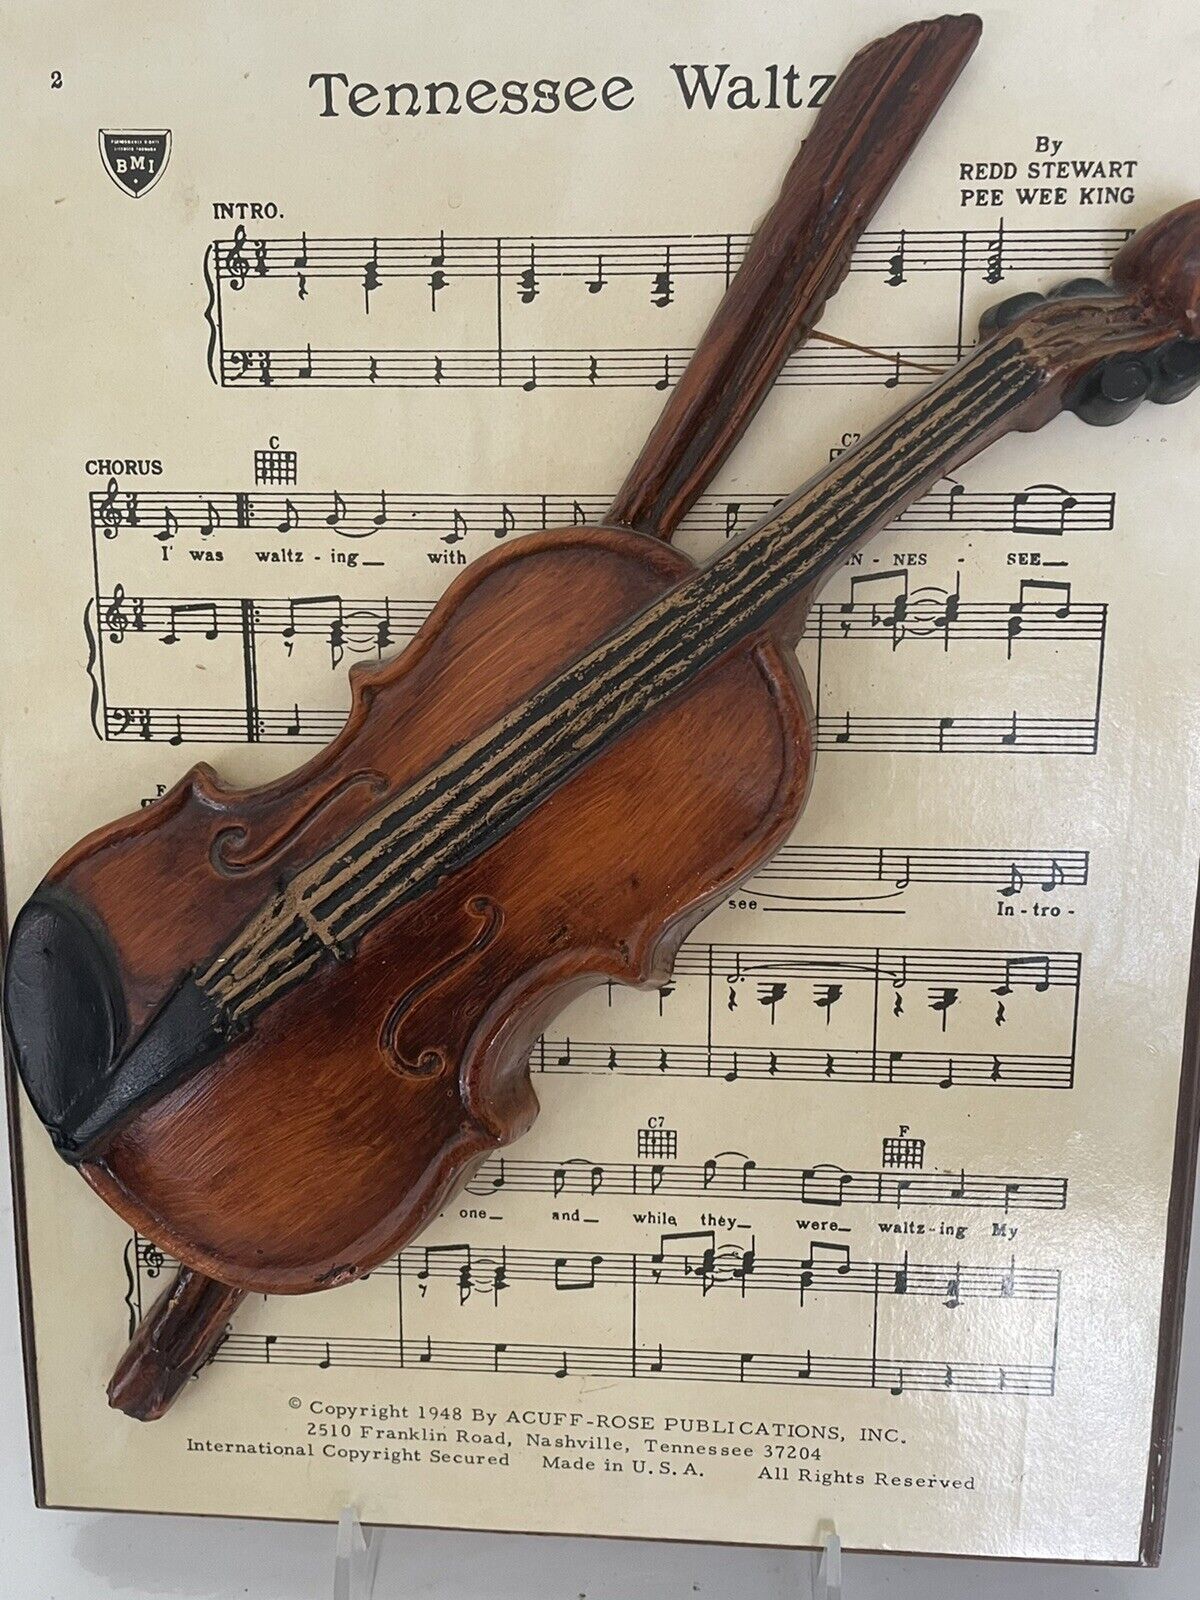 Musical Theme Max 53% OFF Tennessee Waltz with Violin Plaque Vintage MusiT Overseas parallel import regular item